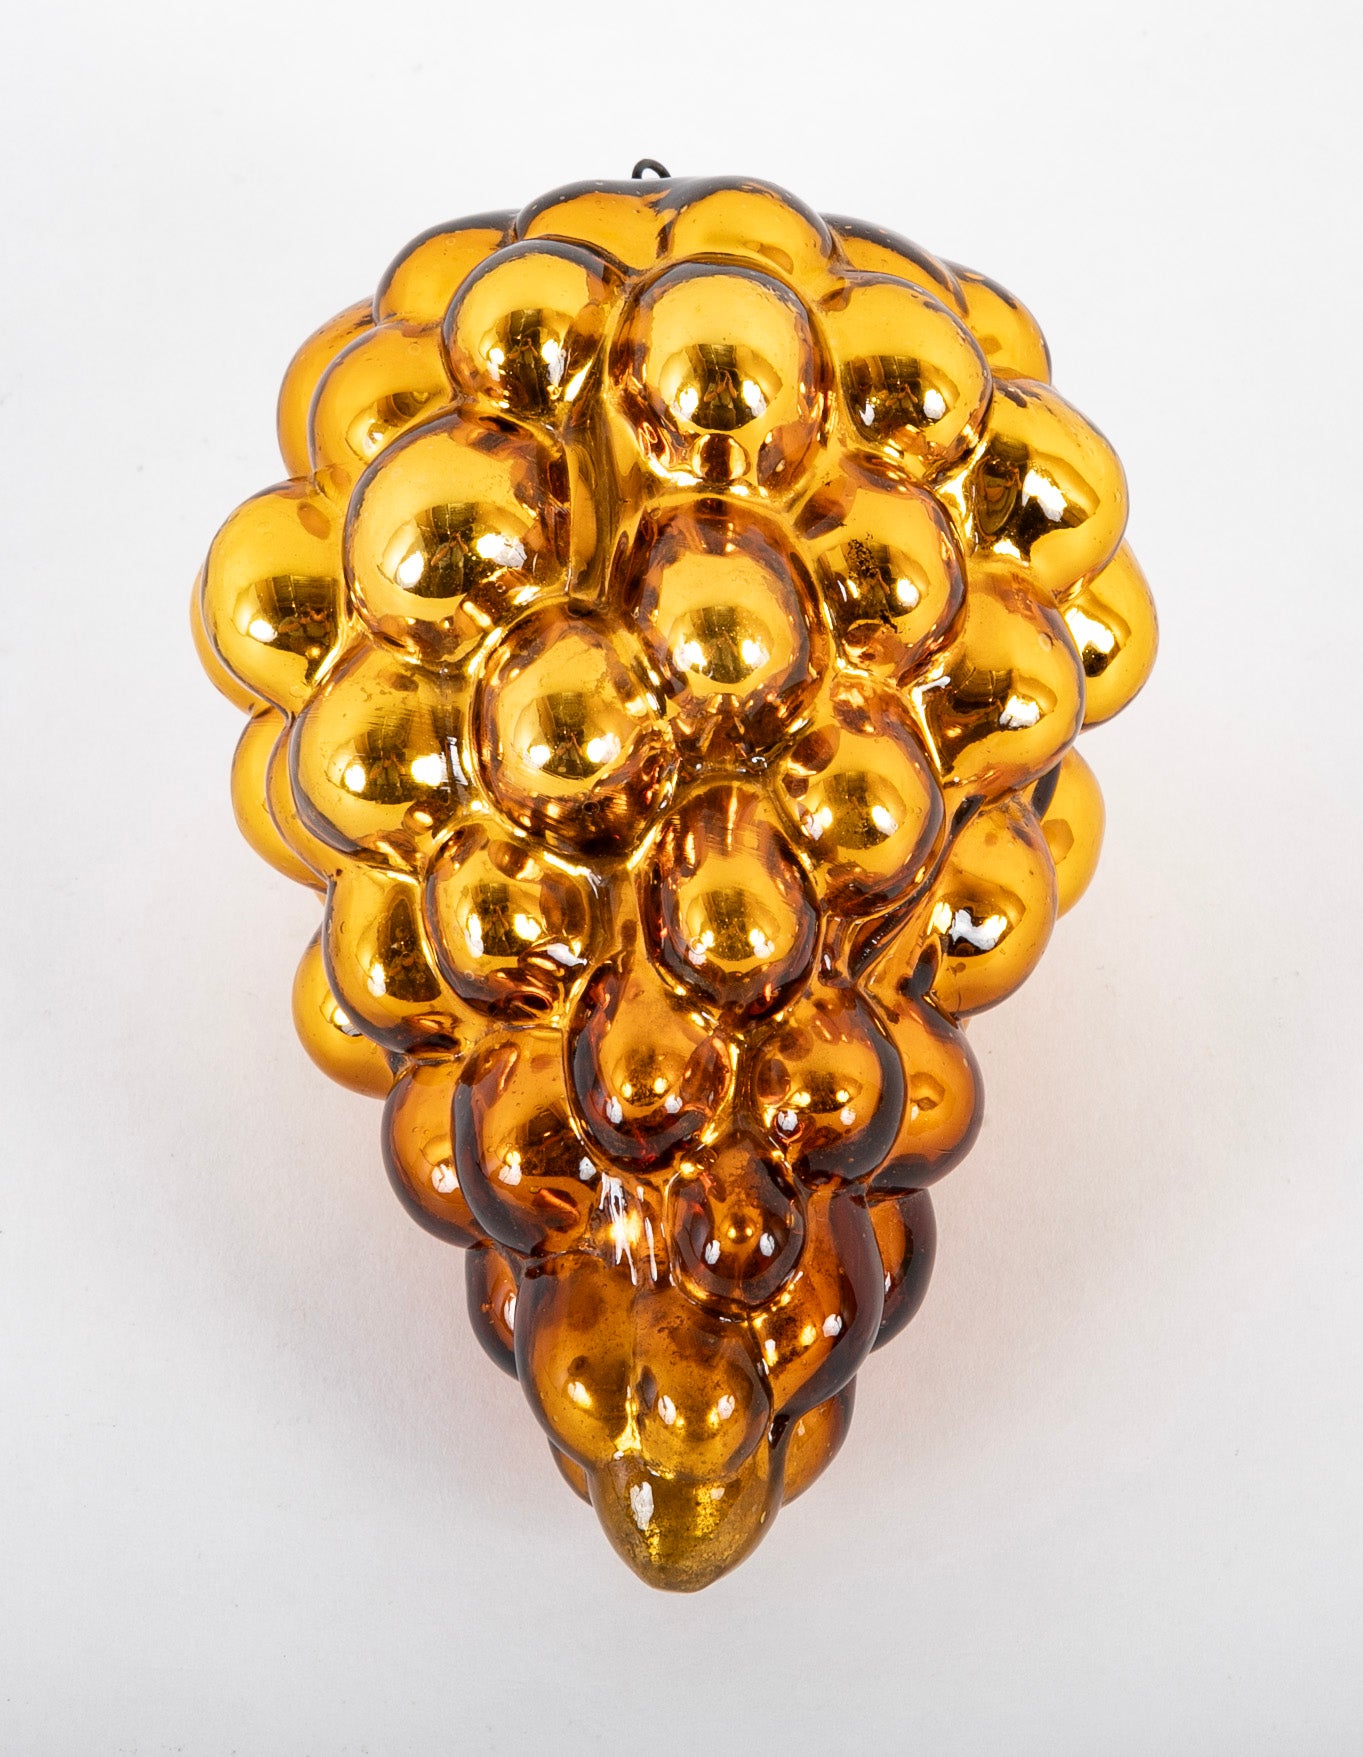 Antique Kugel Gold Glass Grape Cluster Form Ornament with Beehive Cap